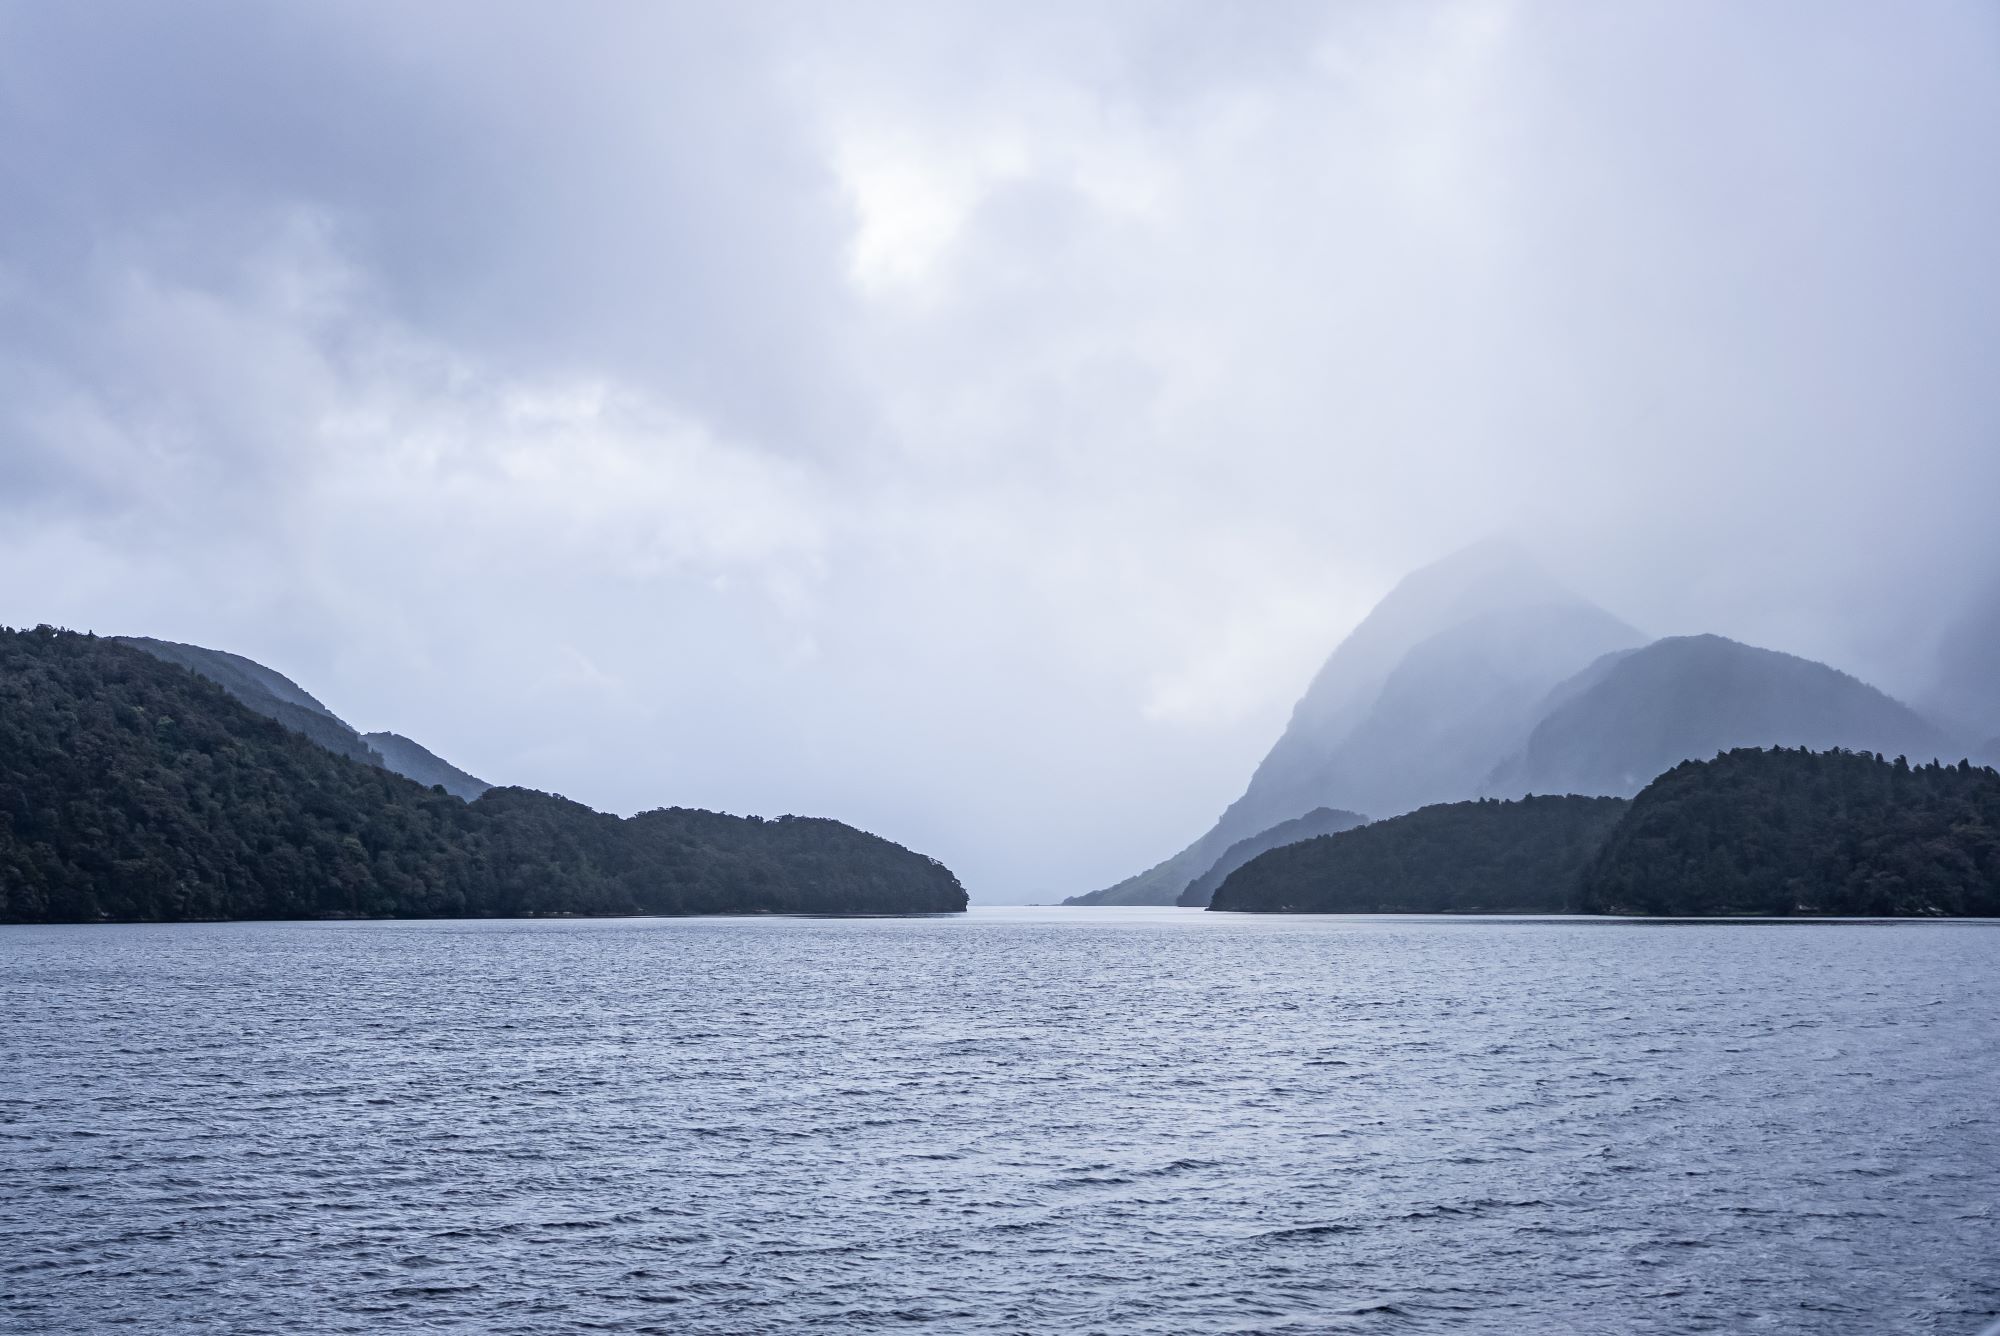 Overcast day in Doubtful Sound